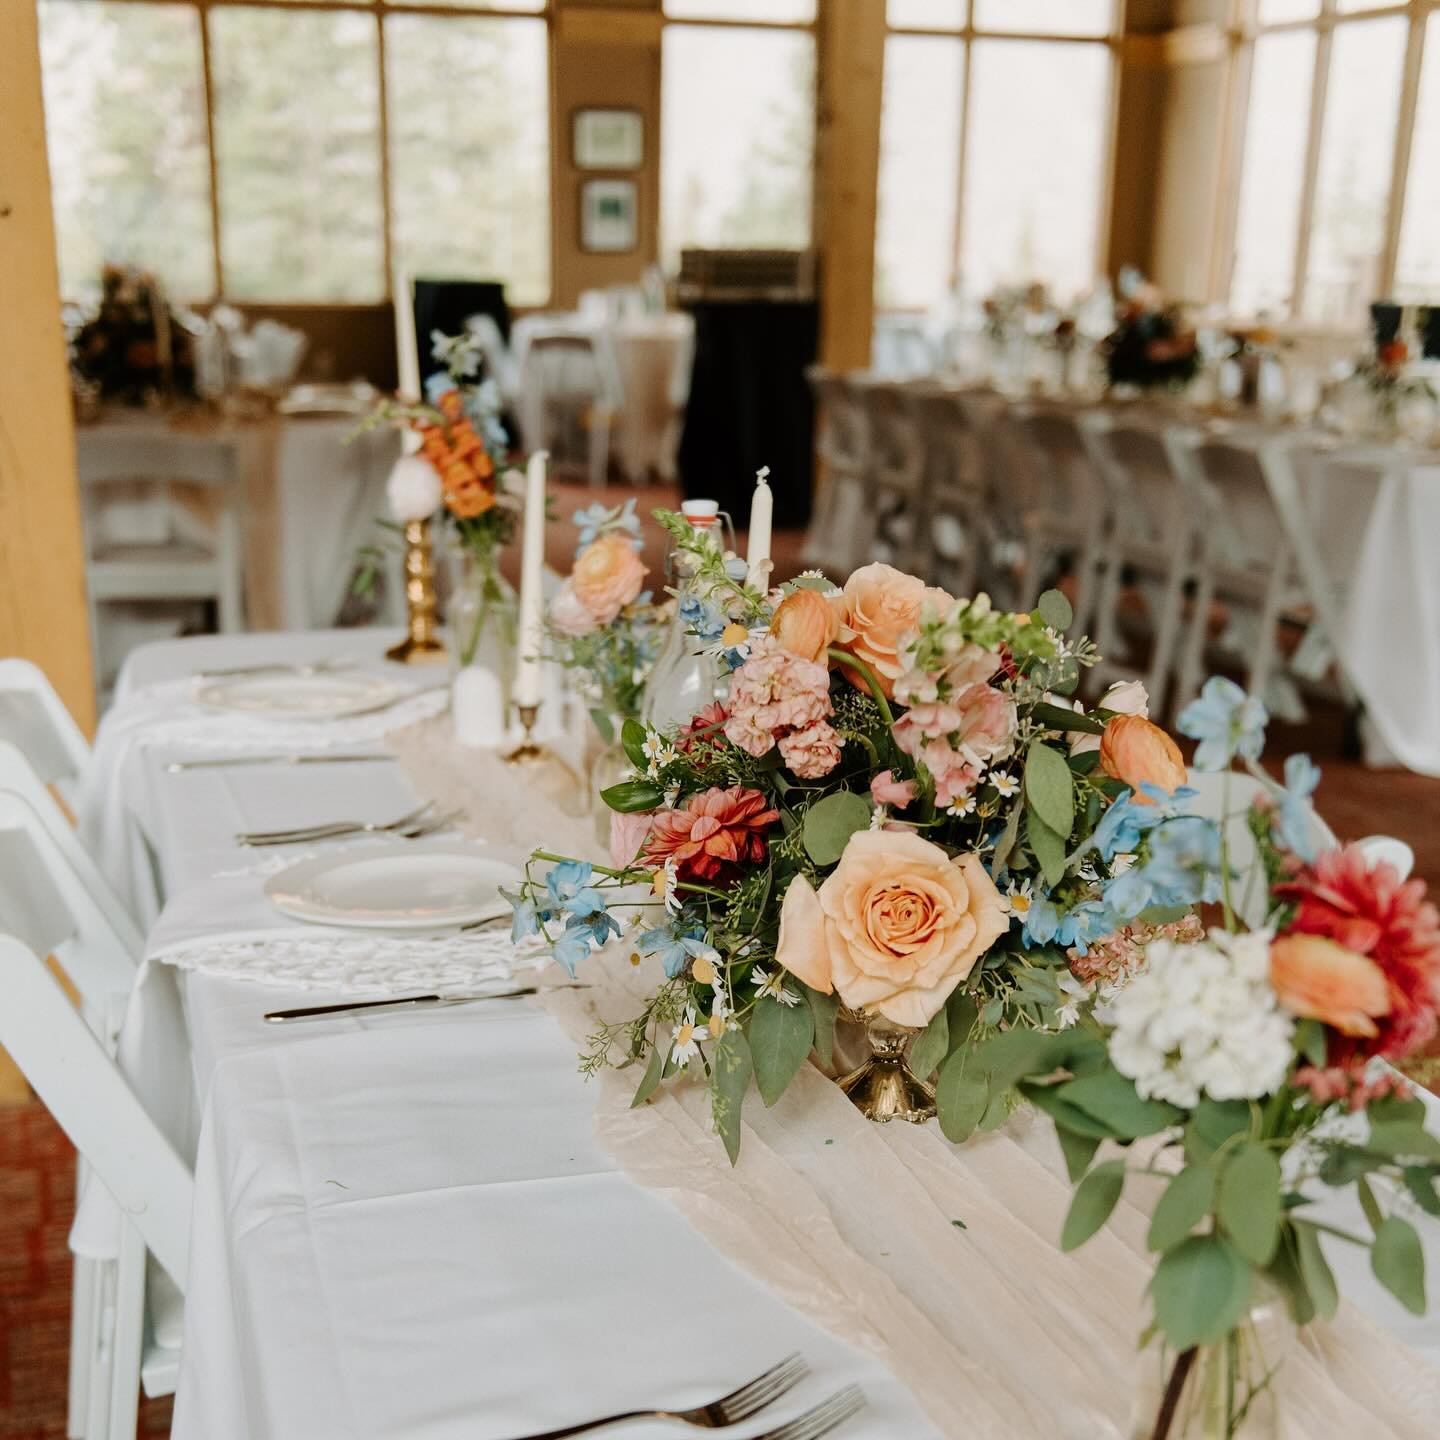 A moment for our table scapes. 
I realize that we don&rsquo;t share this part of our weddings as much as we should. 
We NEED too

Know that we take great joy in all parts of the wedding planning- but table scapes, decor and florals always keep me exc